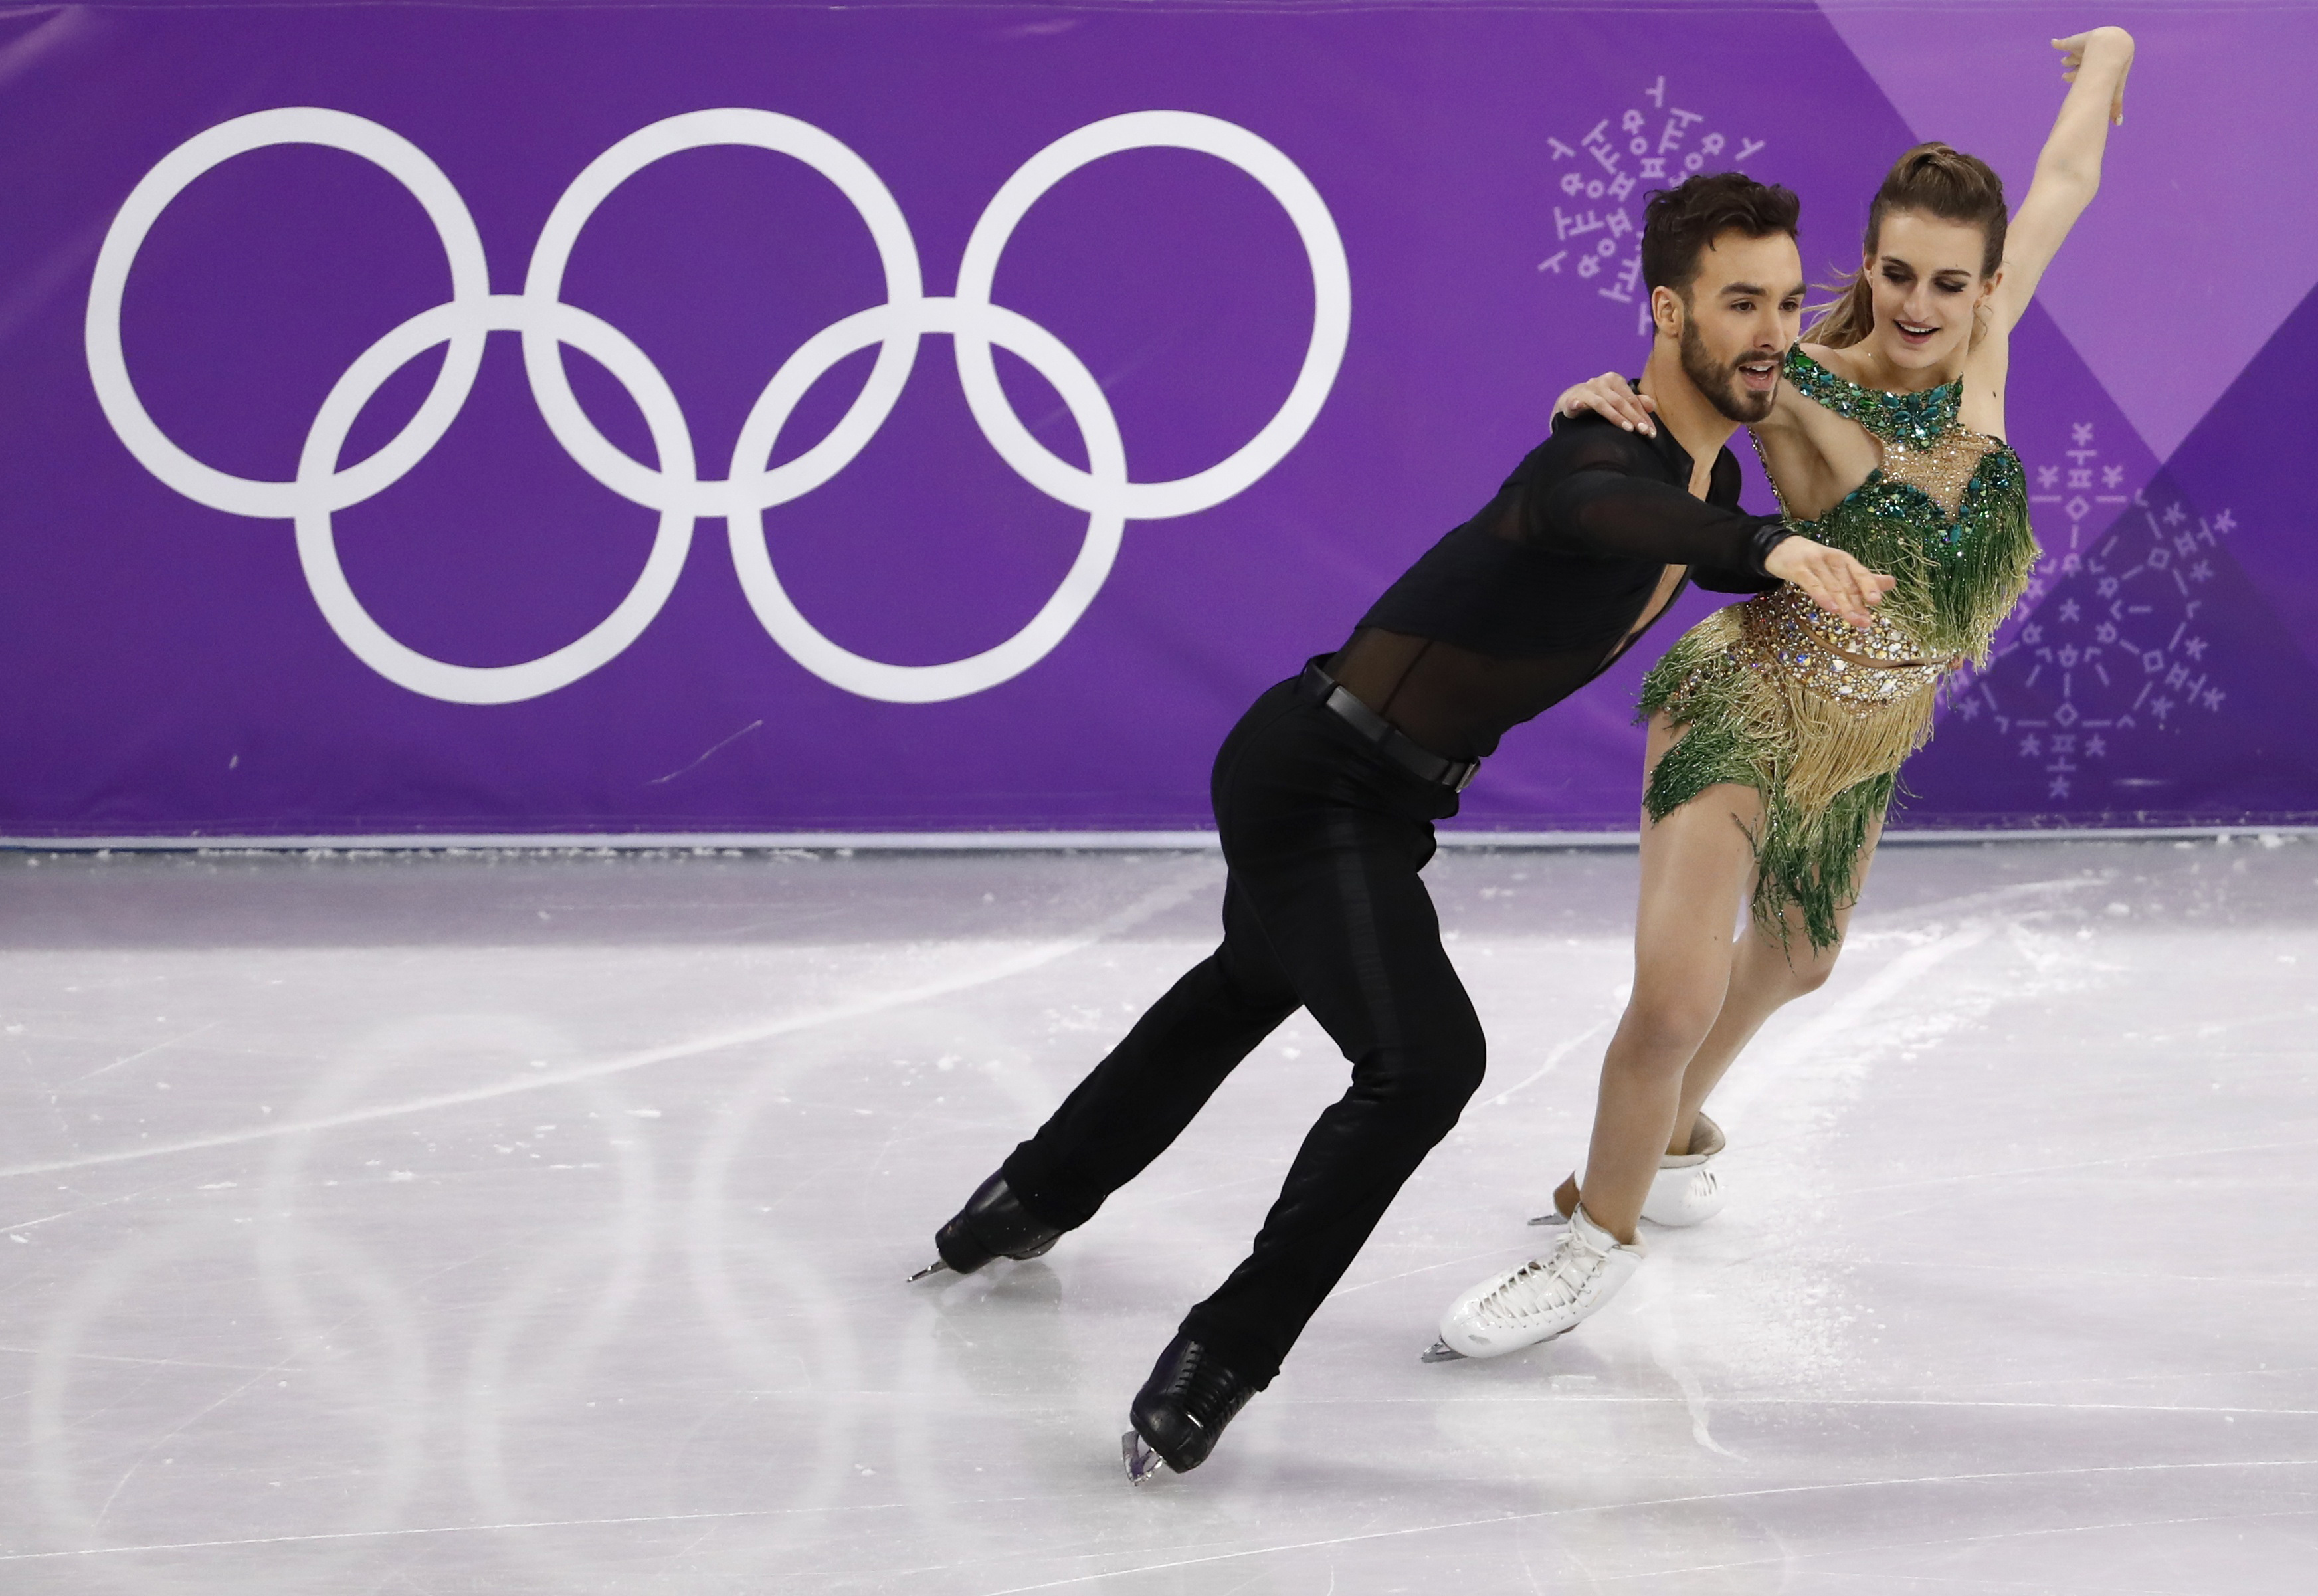 Guillaume Cizeron and Gabriella Papadakis of France perform in the 
                      Pyeongchang 2018 Winter Olympics at the Gangneung Ice Arena in Gangneung, South Korea on February 19, 2018. (Damir Sagolj—Reuters)